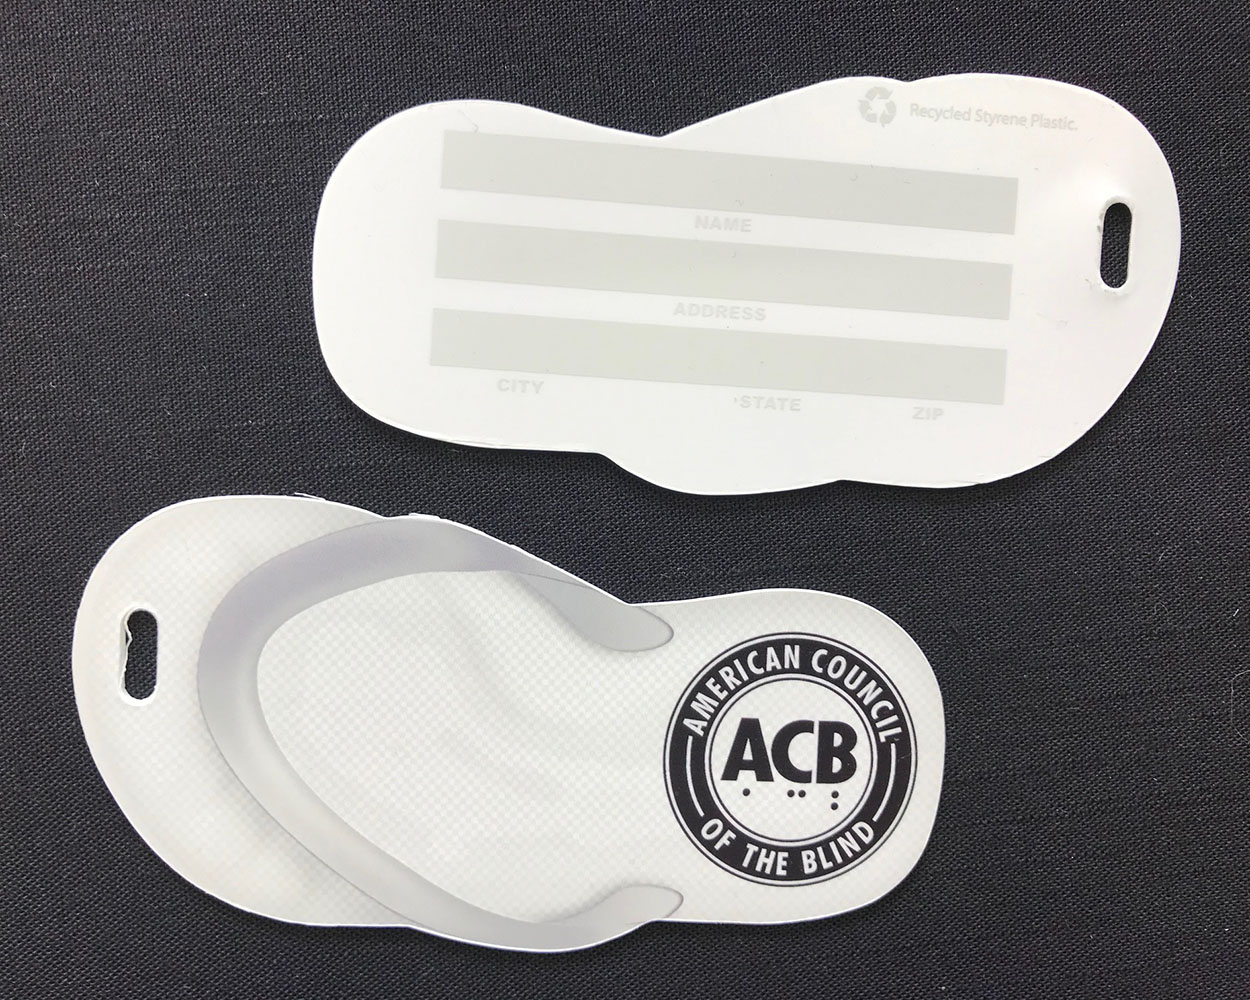 White Sandal Luggage Tag - front and back view